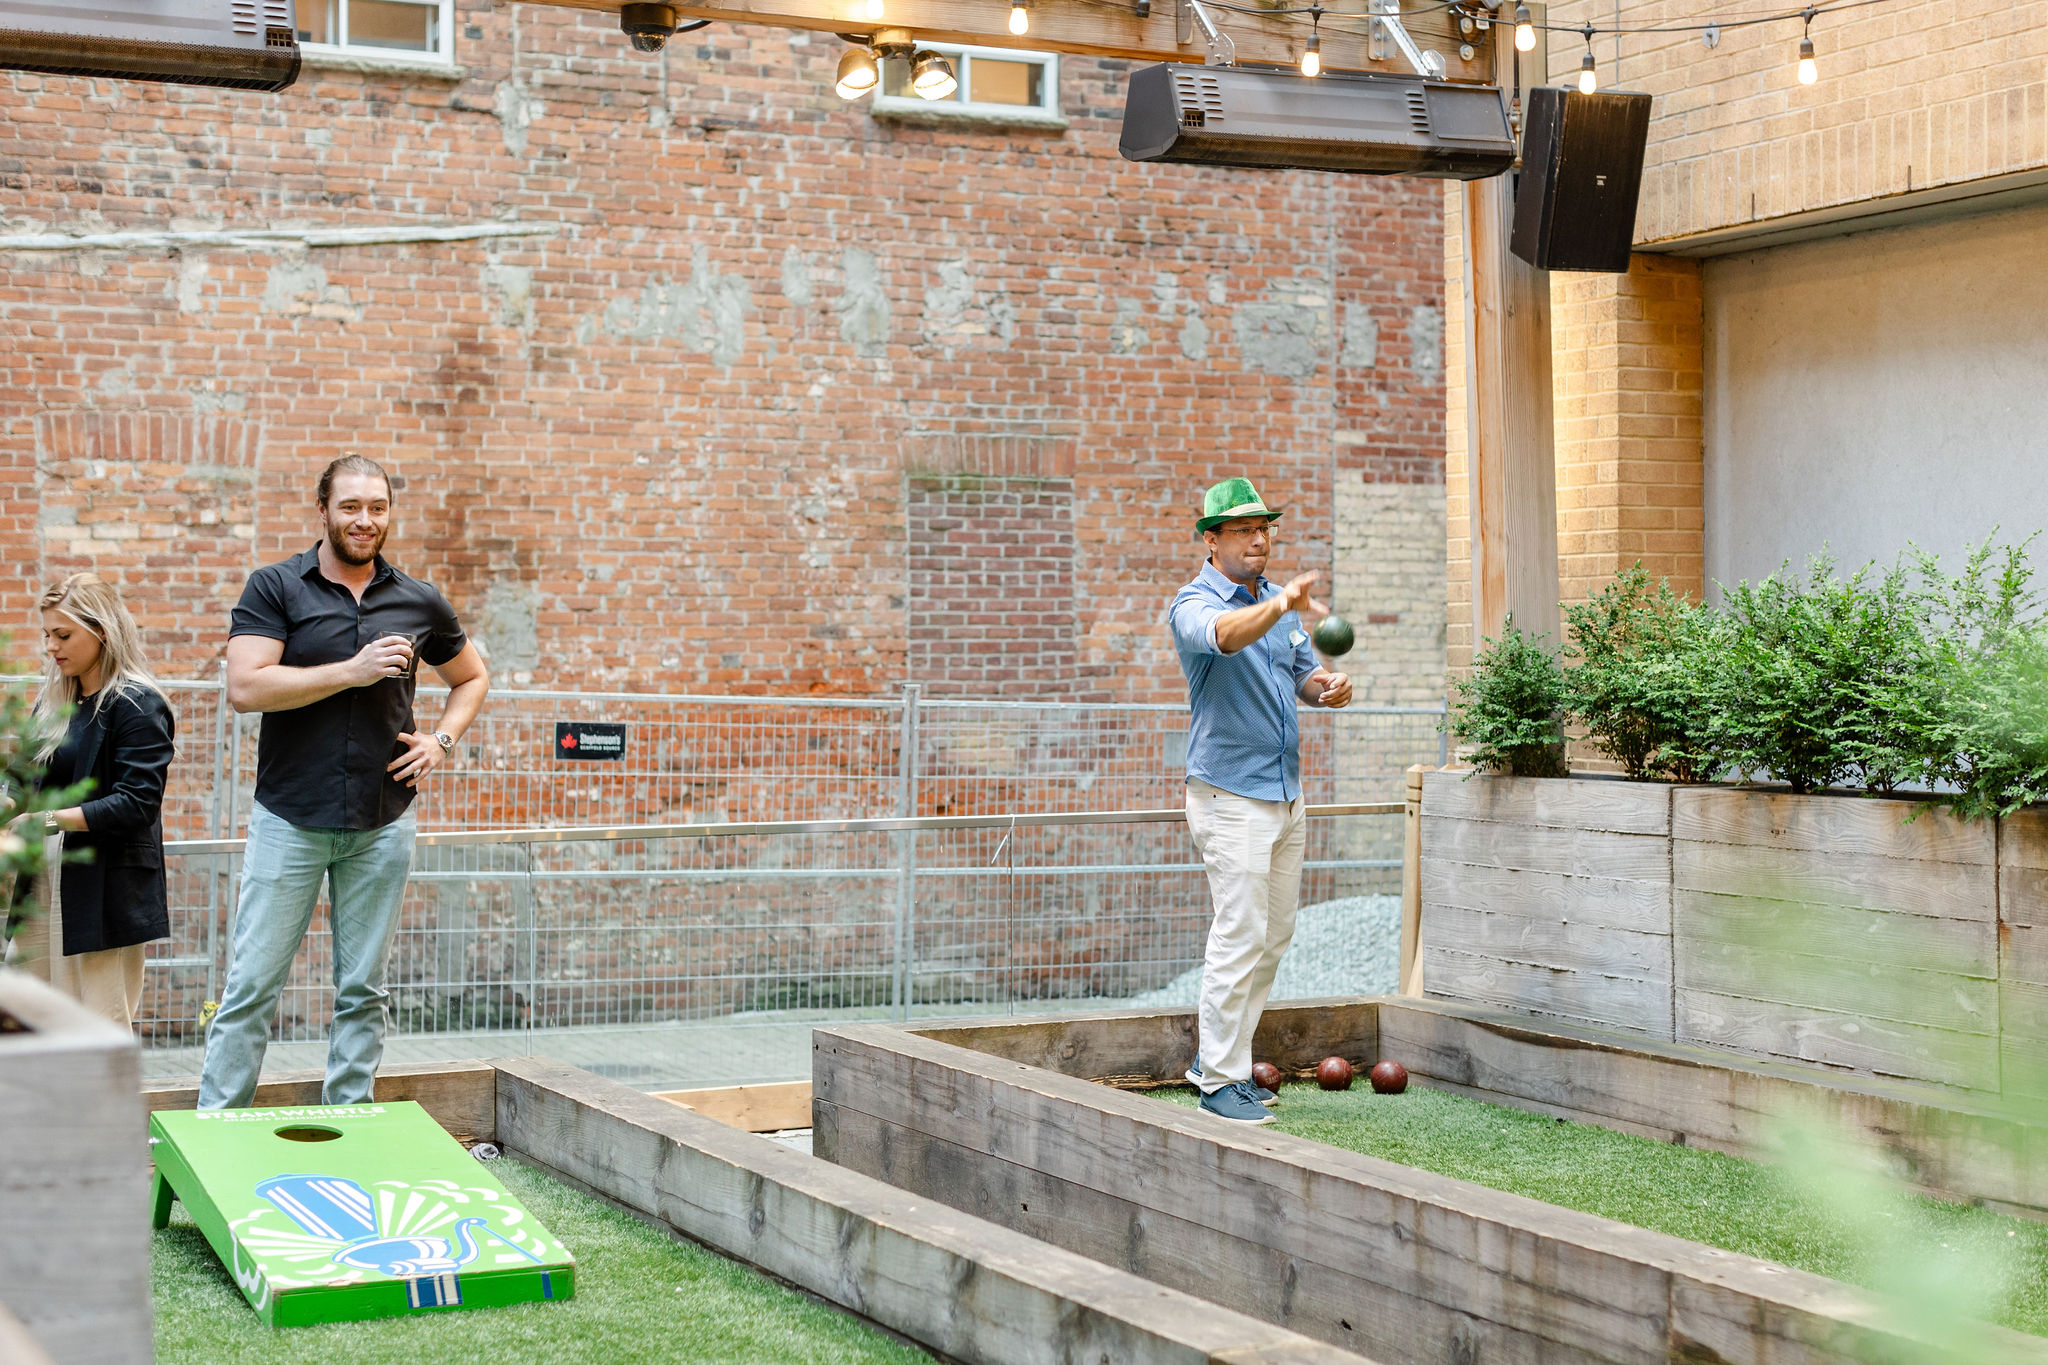 Social event photography of two men playing a game of cornhole in a backyard.